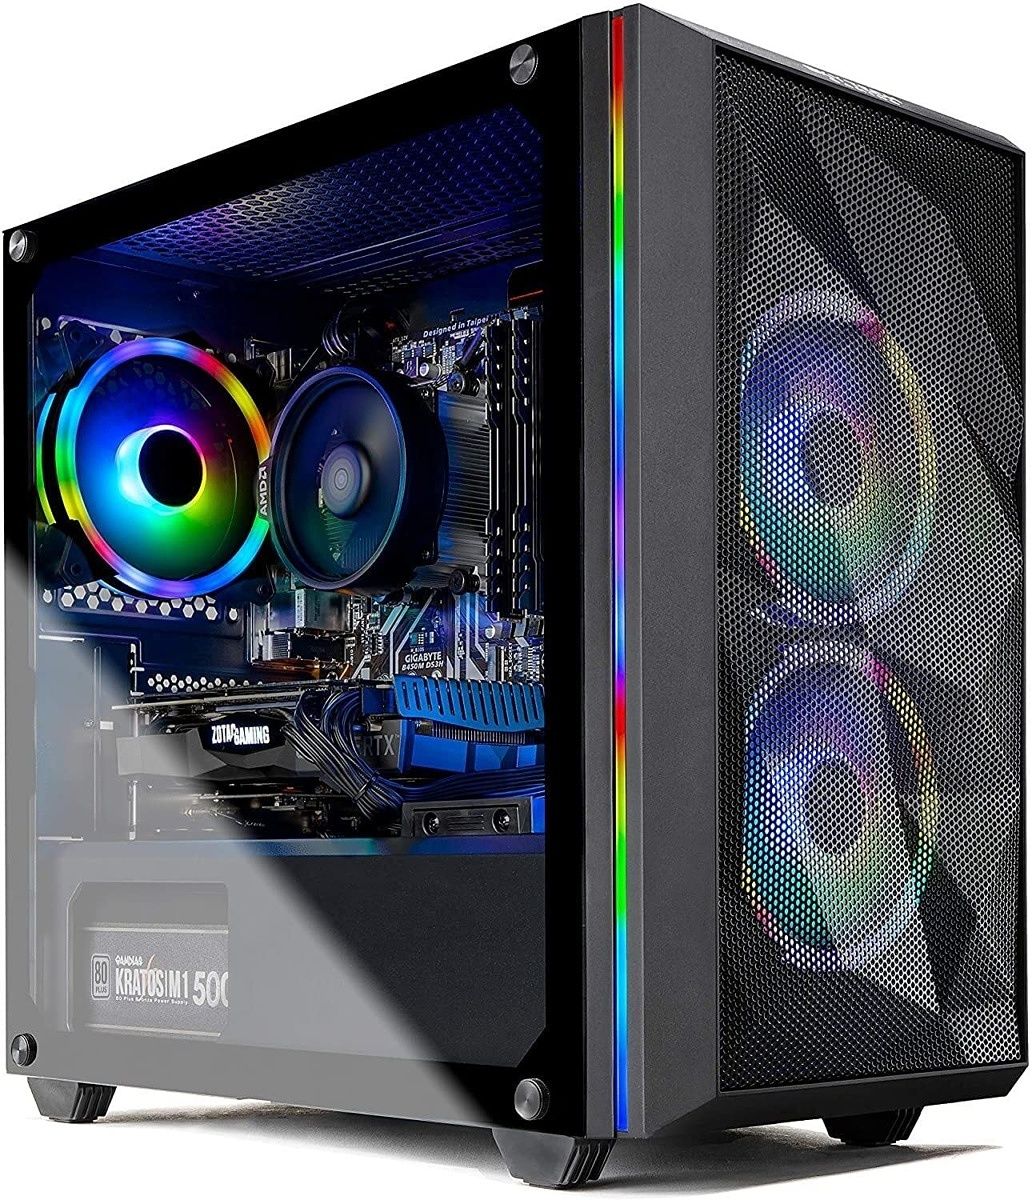 For those on a tighter budget, the Skytech Chronos Mini is a solid gaming desktop capable of running most modern games.